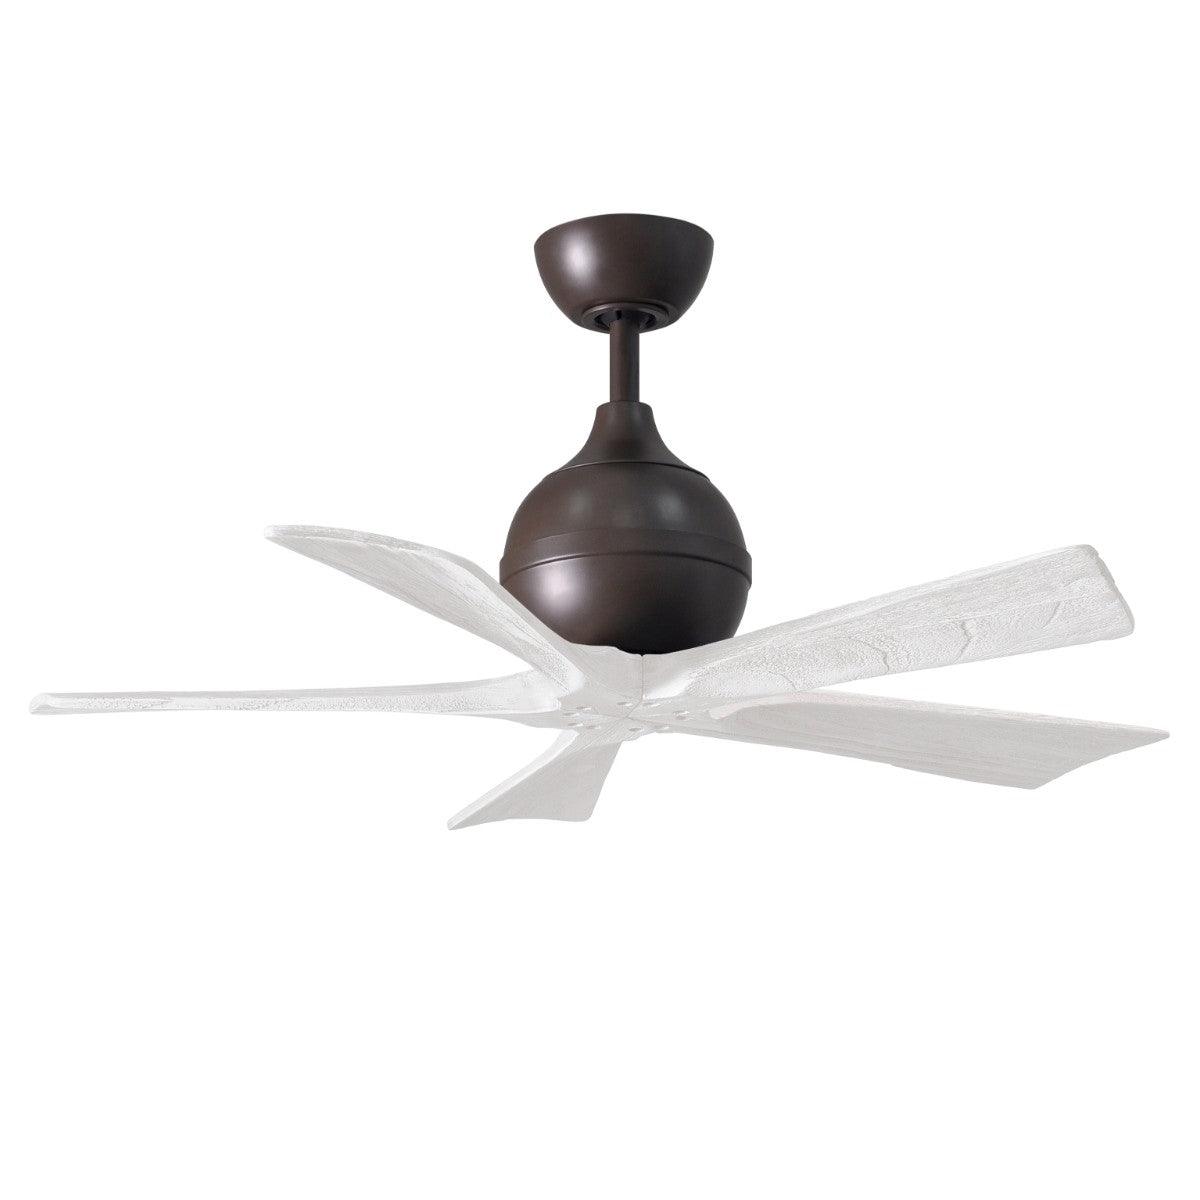 Irene 42 Inch 5 Blades Modern Outdoor Ceiling Fan With Remote And Wall Control